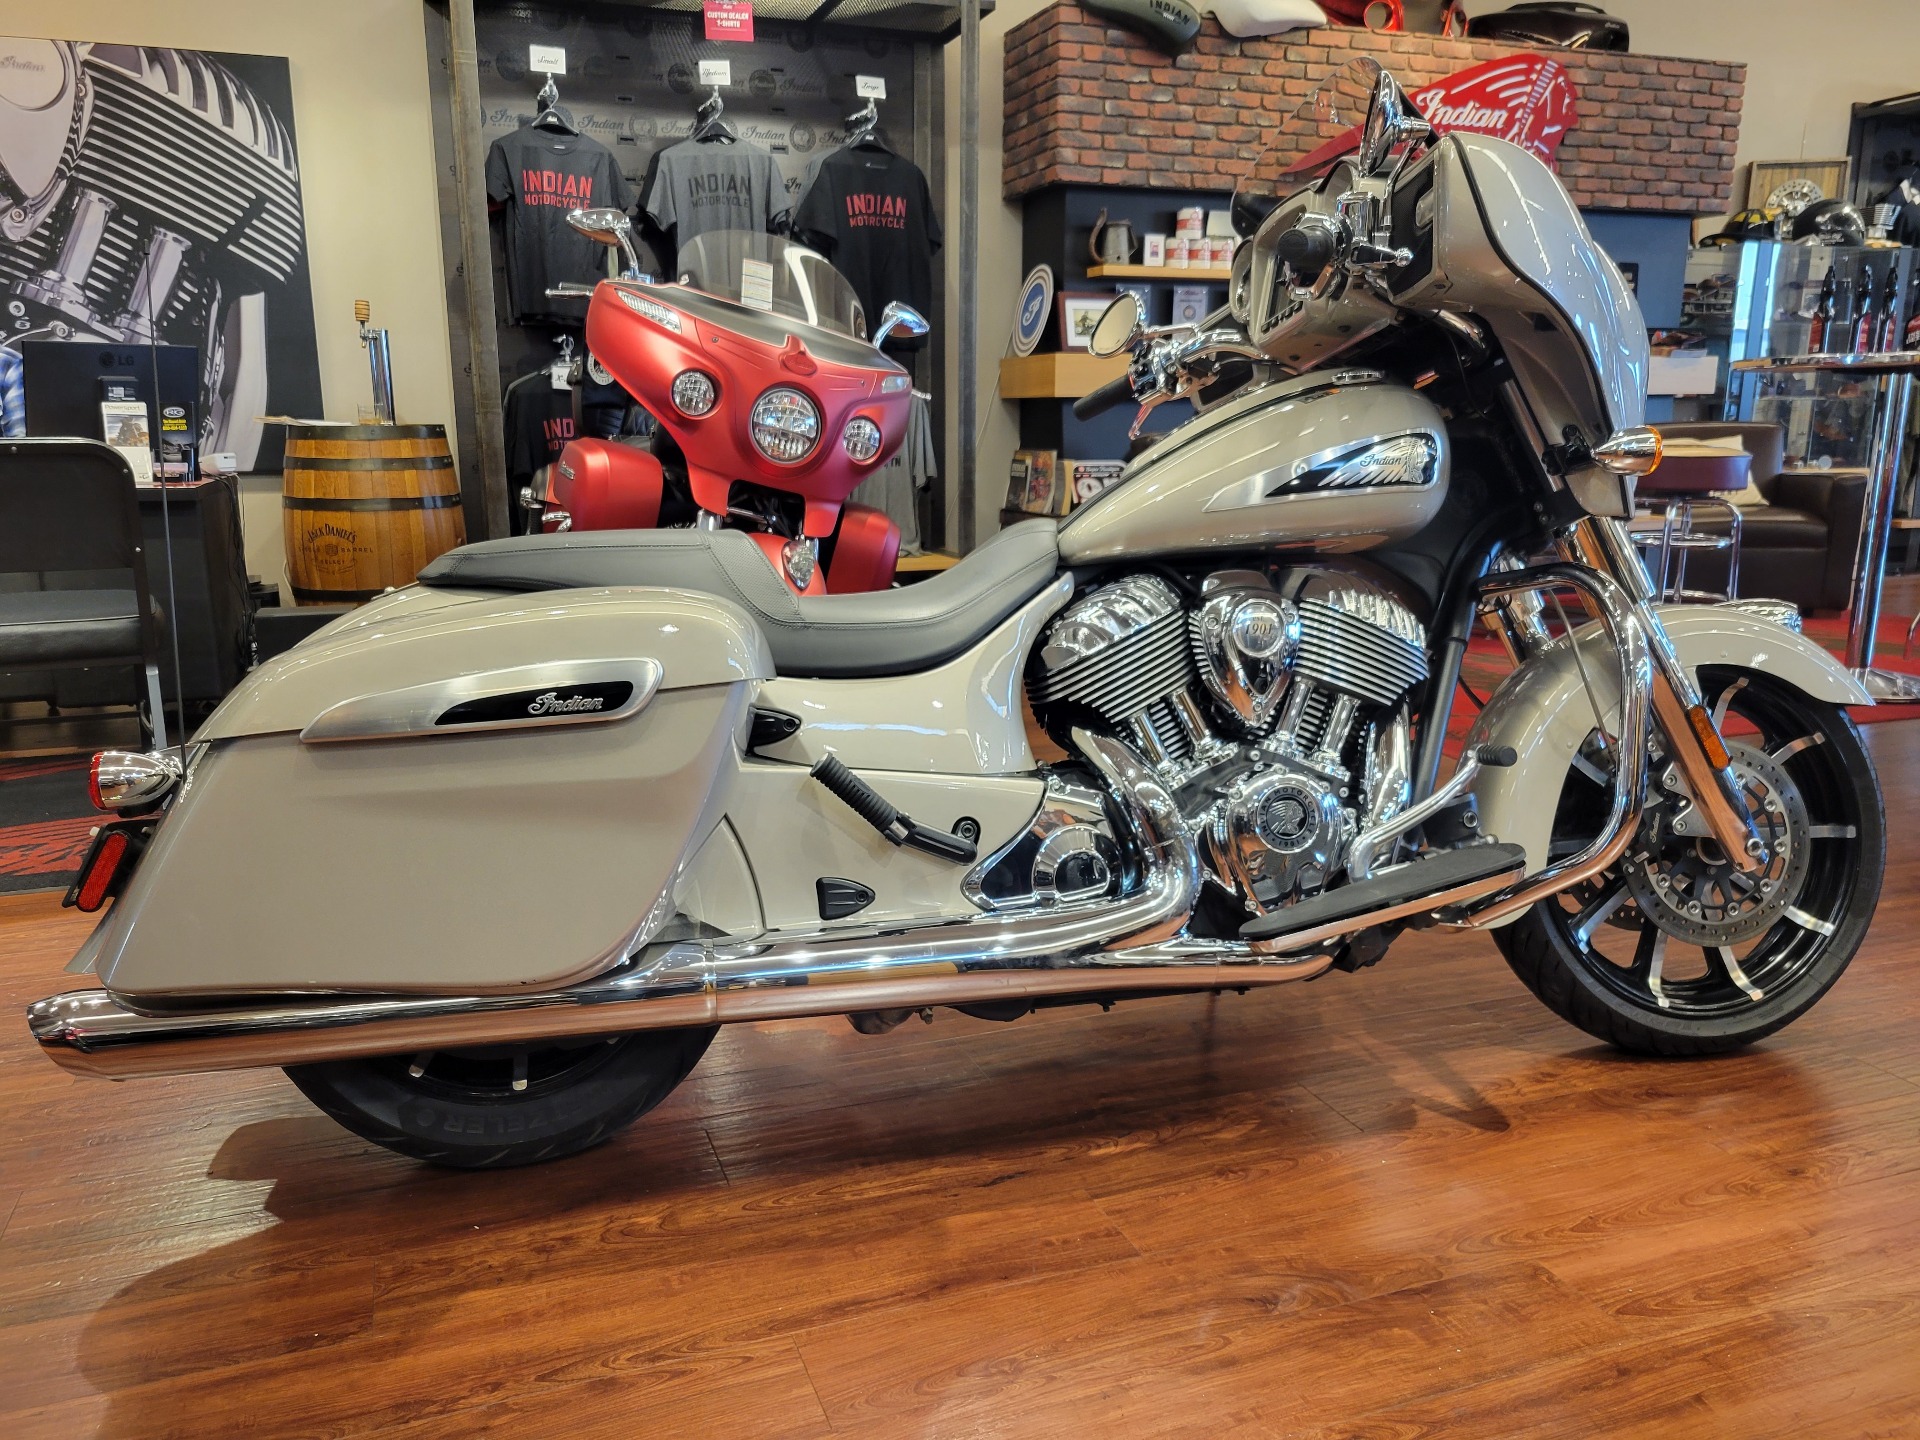 2022 Indian Chieftain® Limited in Nashville, Tennessee - Photo 1